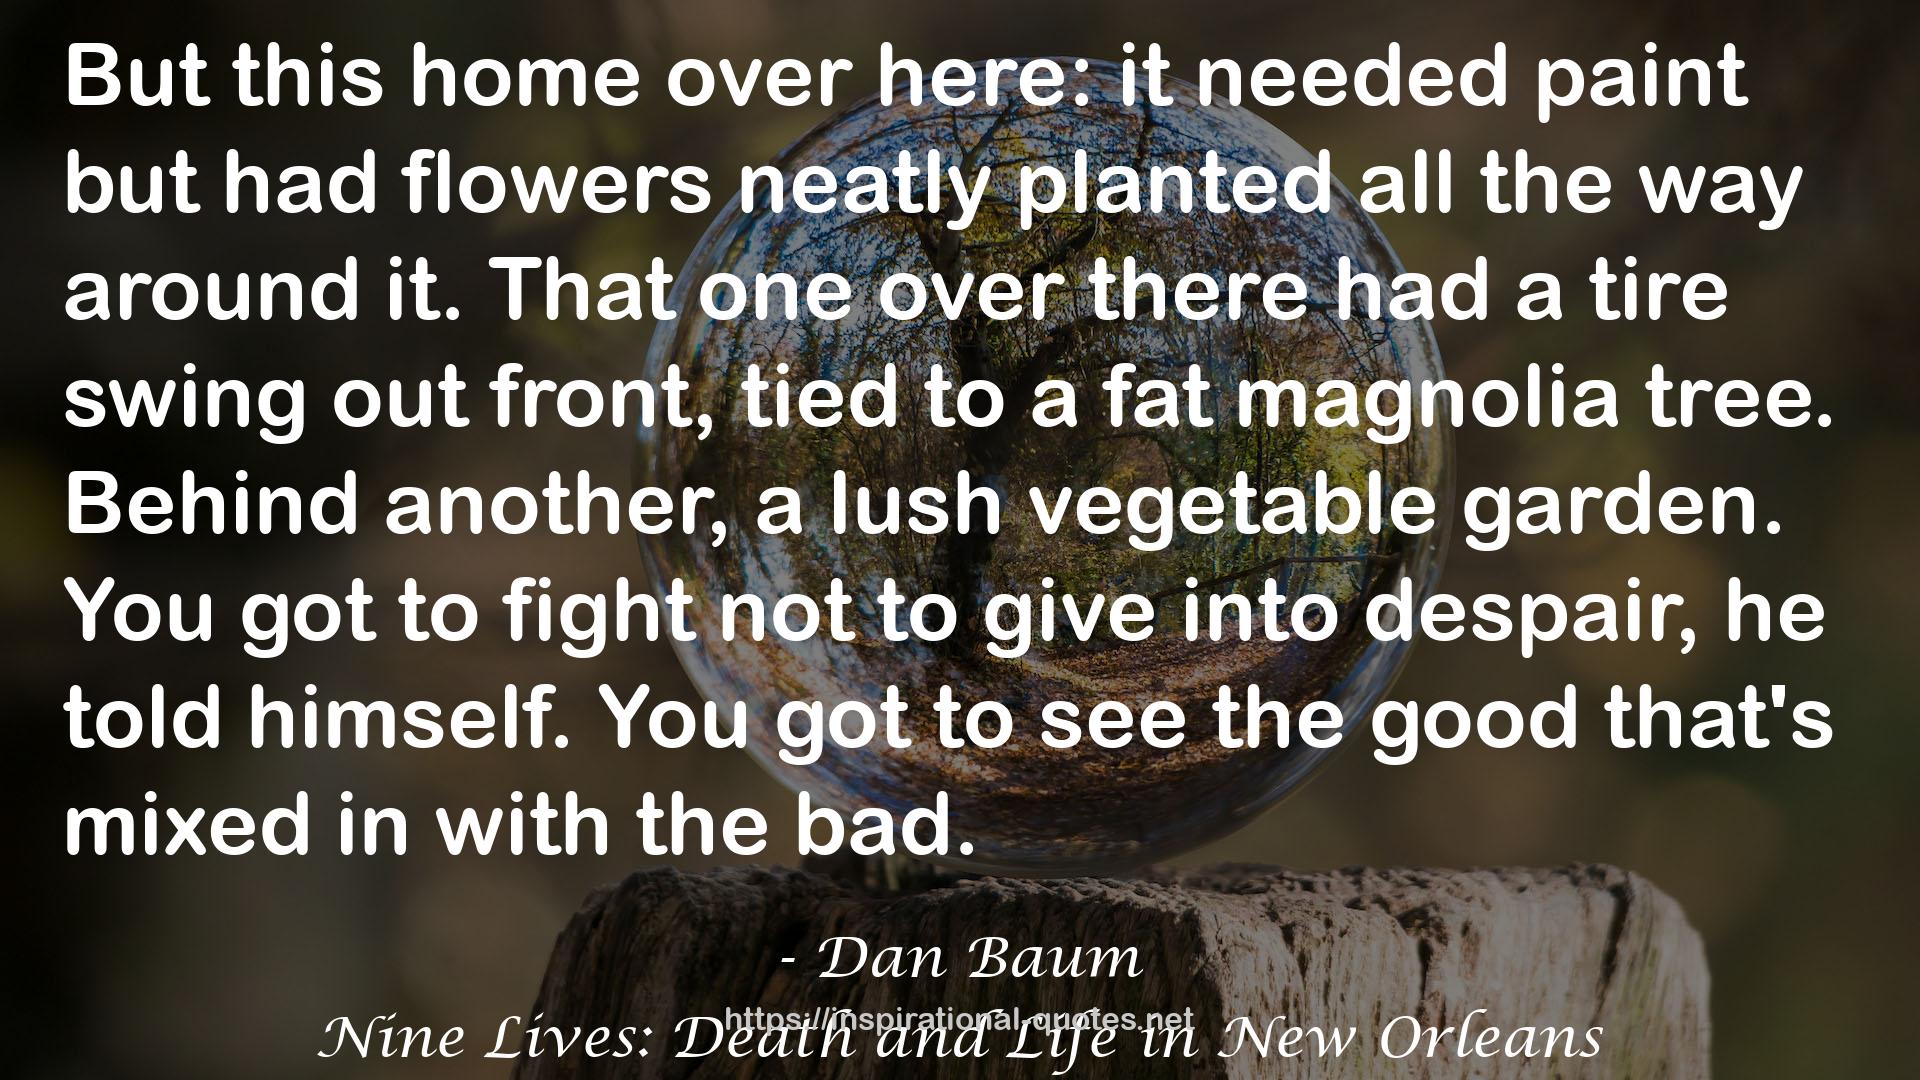 Nine Lives: Death and Life in New Orleans QUOTES